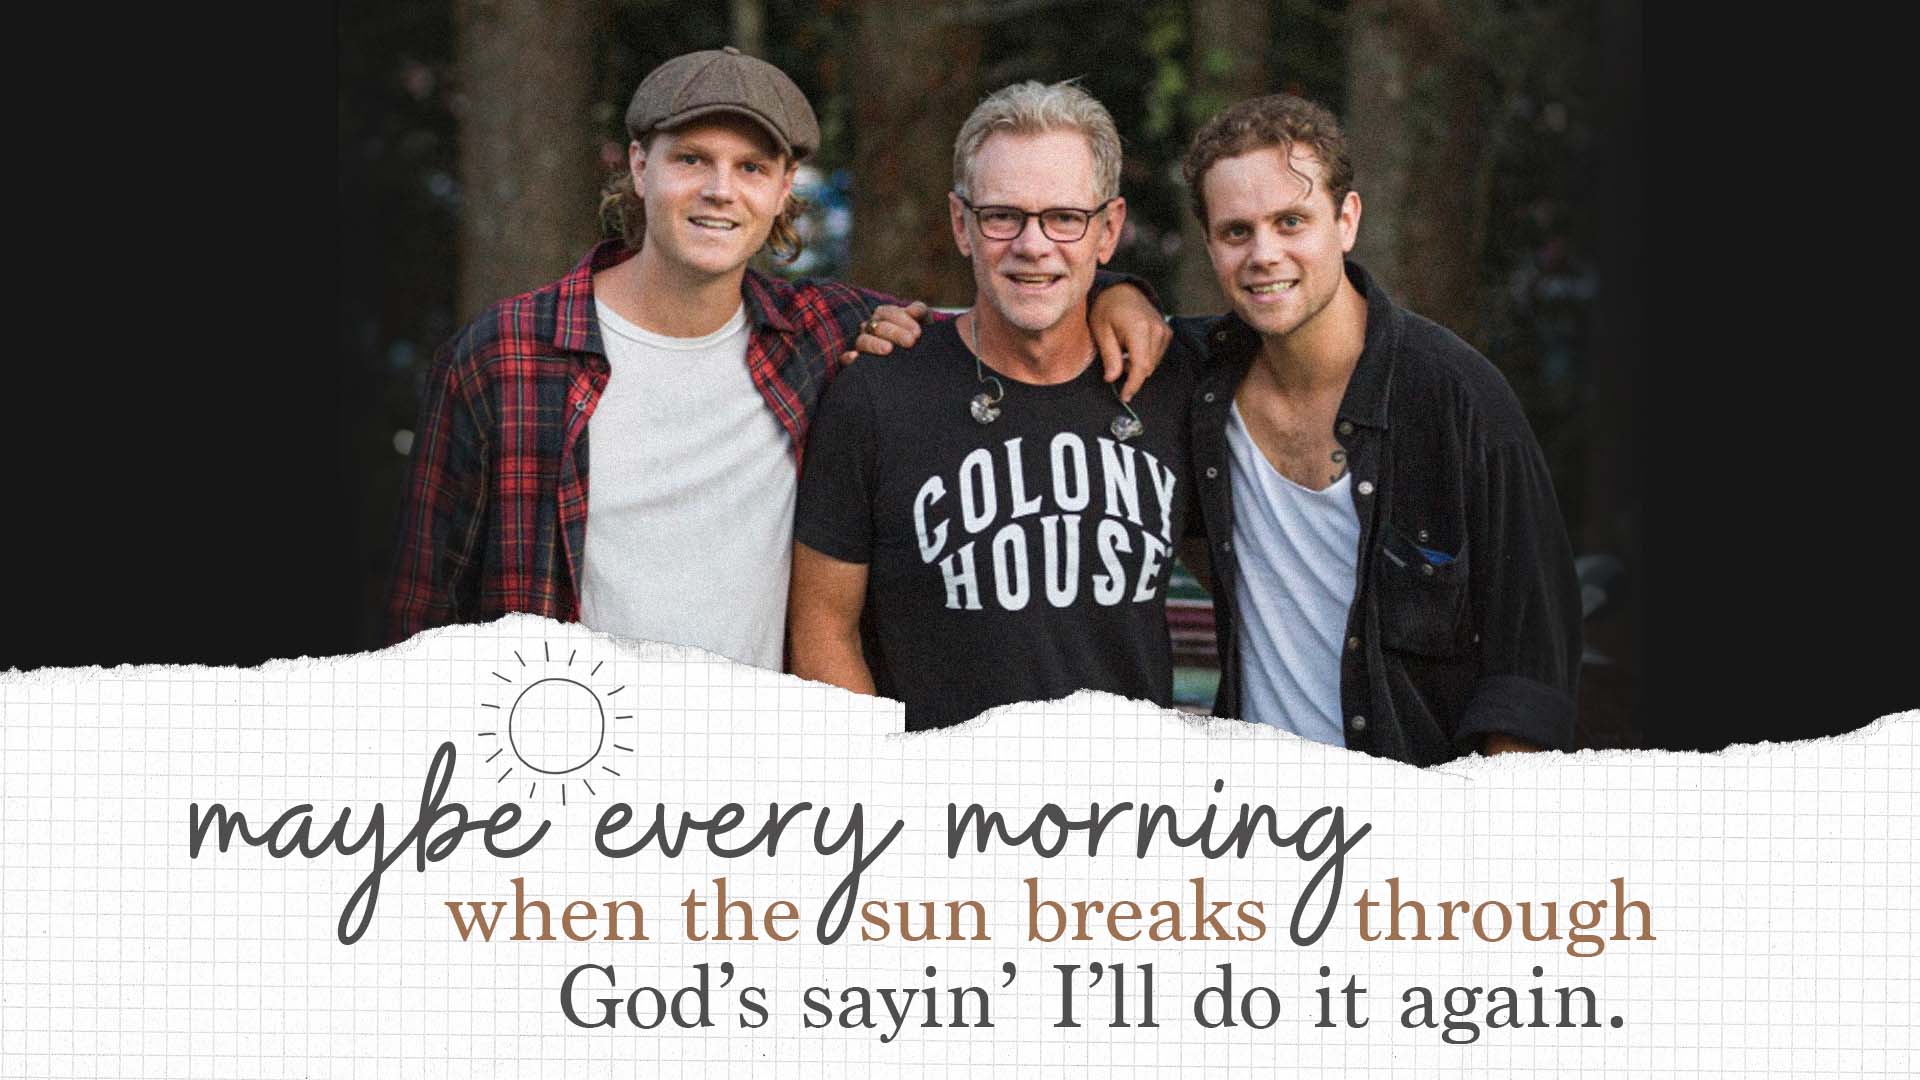 Steven Curtis Chapman and his sons. "Maybe every morning when the sun breaks through, God's sayin' I'll do it again."